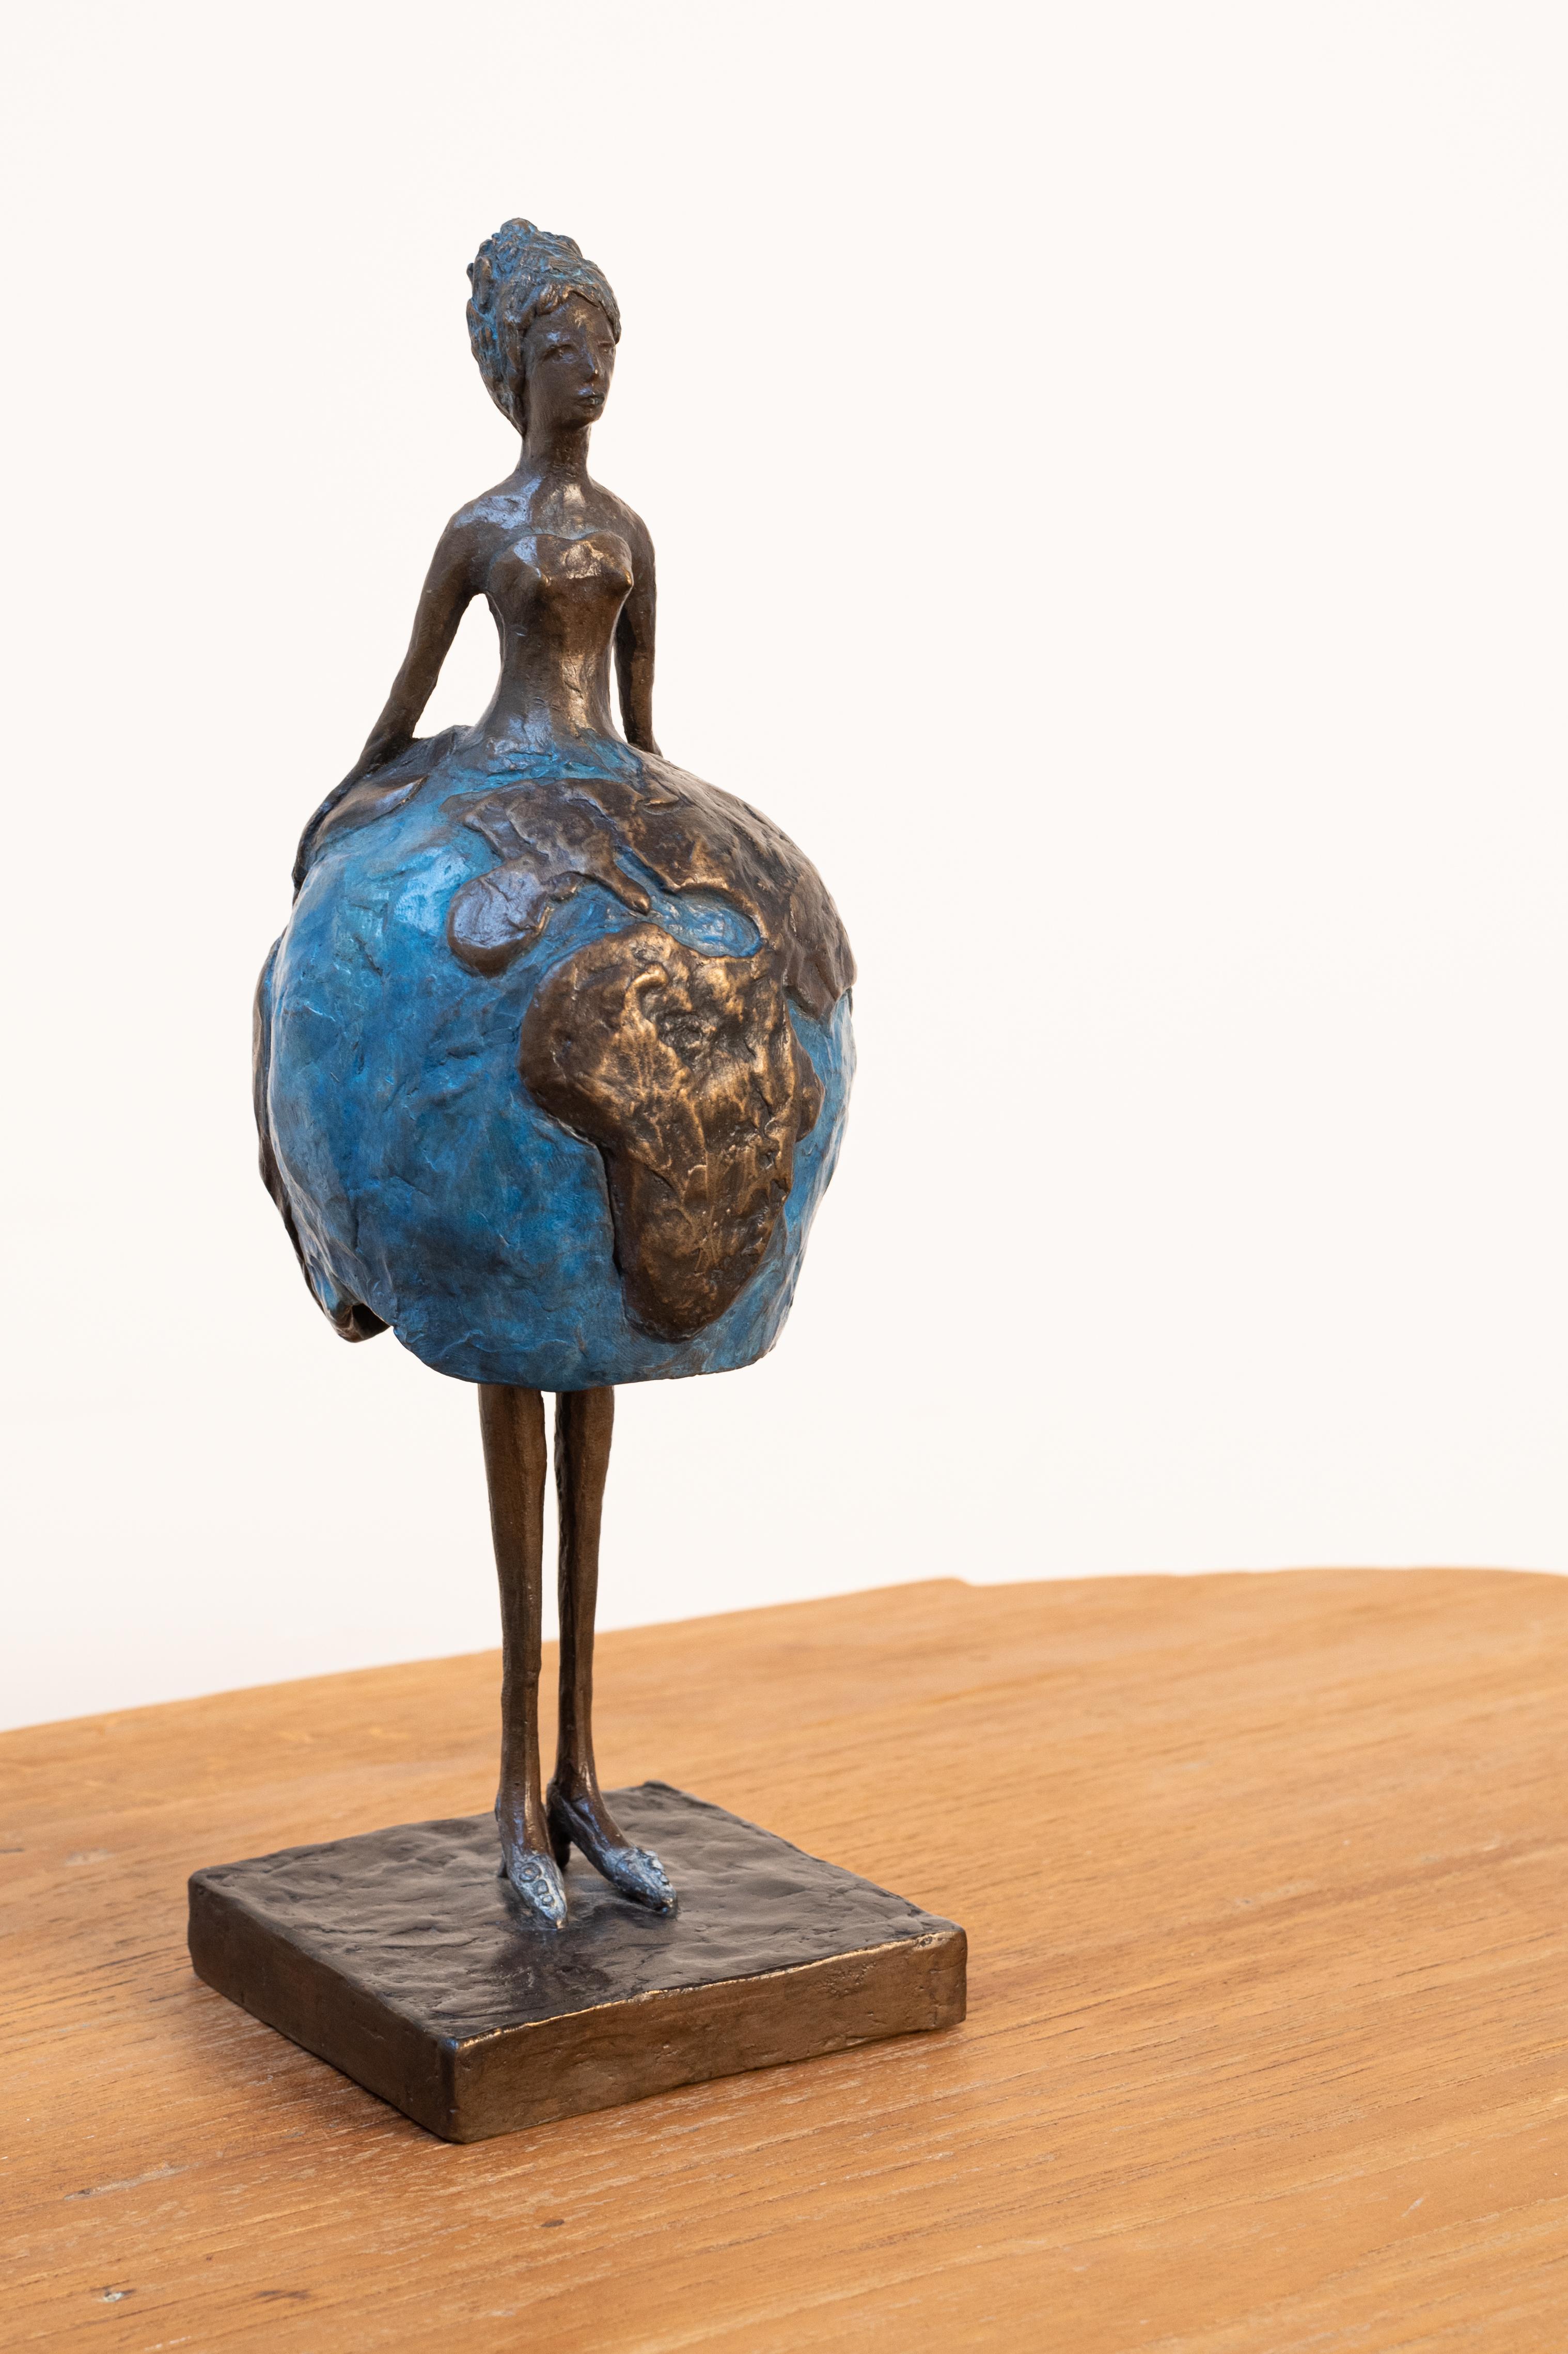 Ewa Rossano Figurative Sculpture - La planète - Bronze statue of a woman with our planet as her skirt